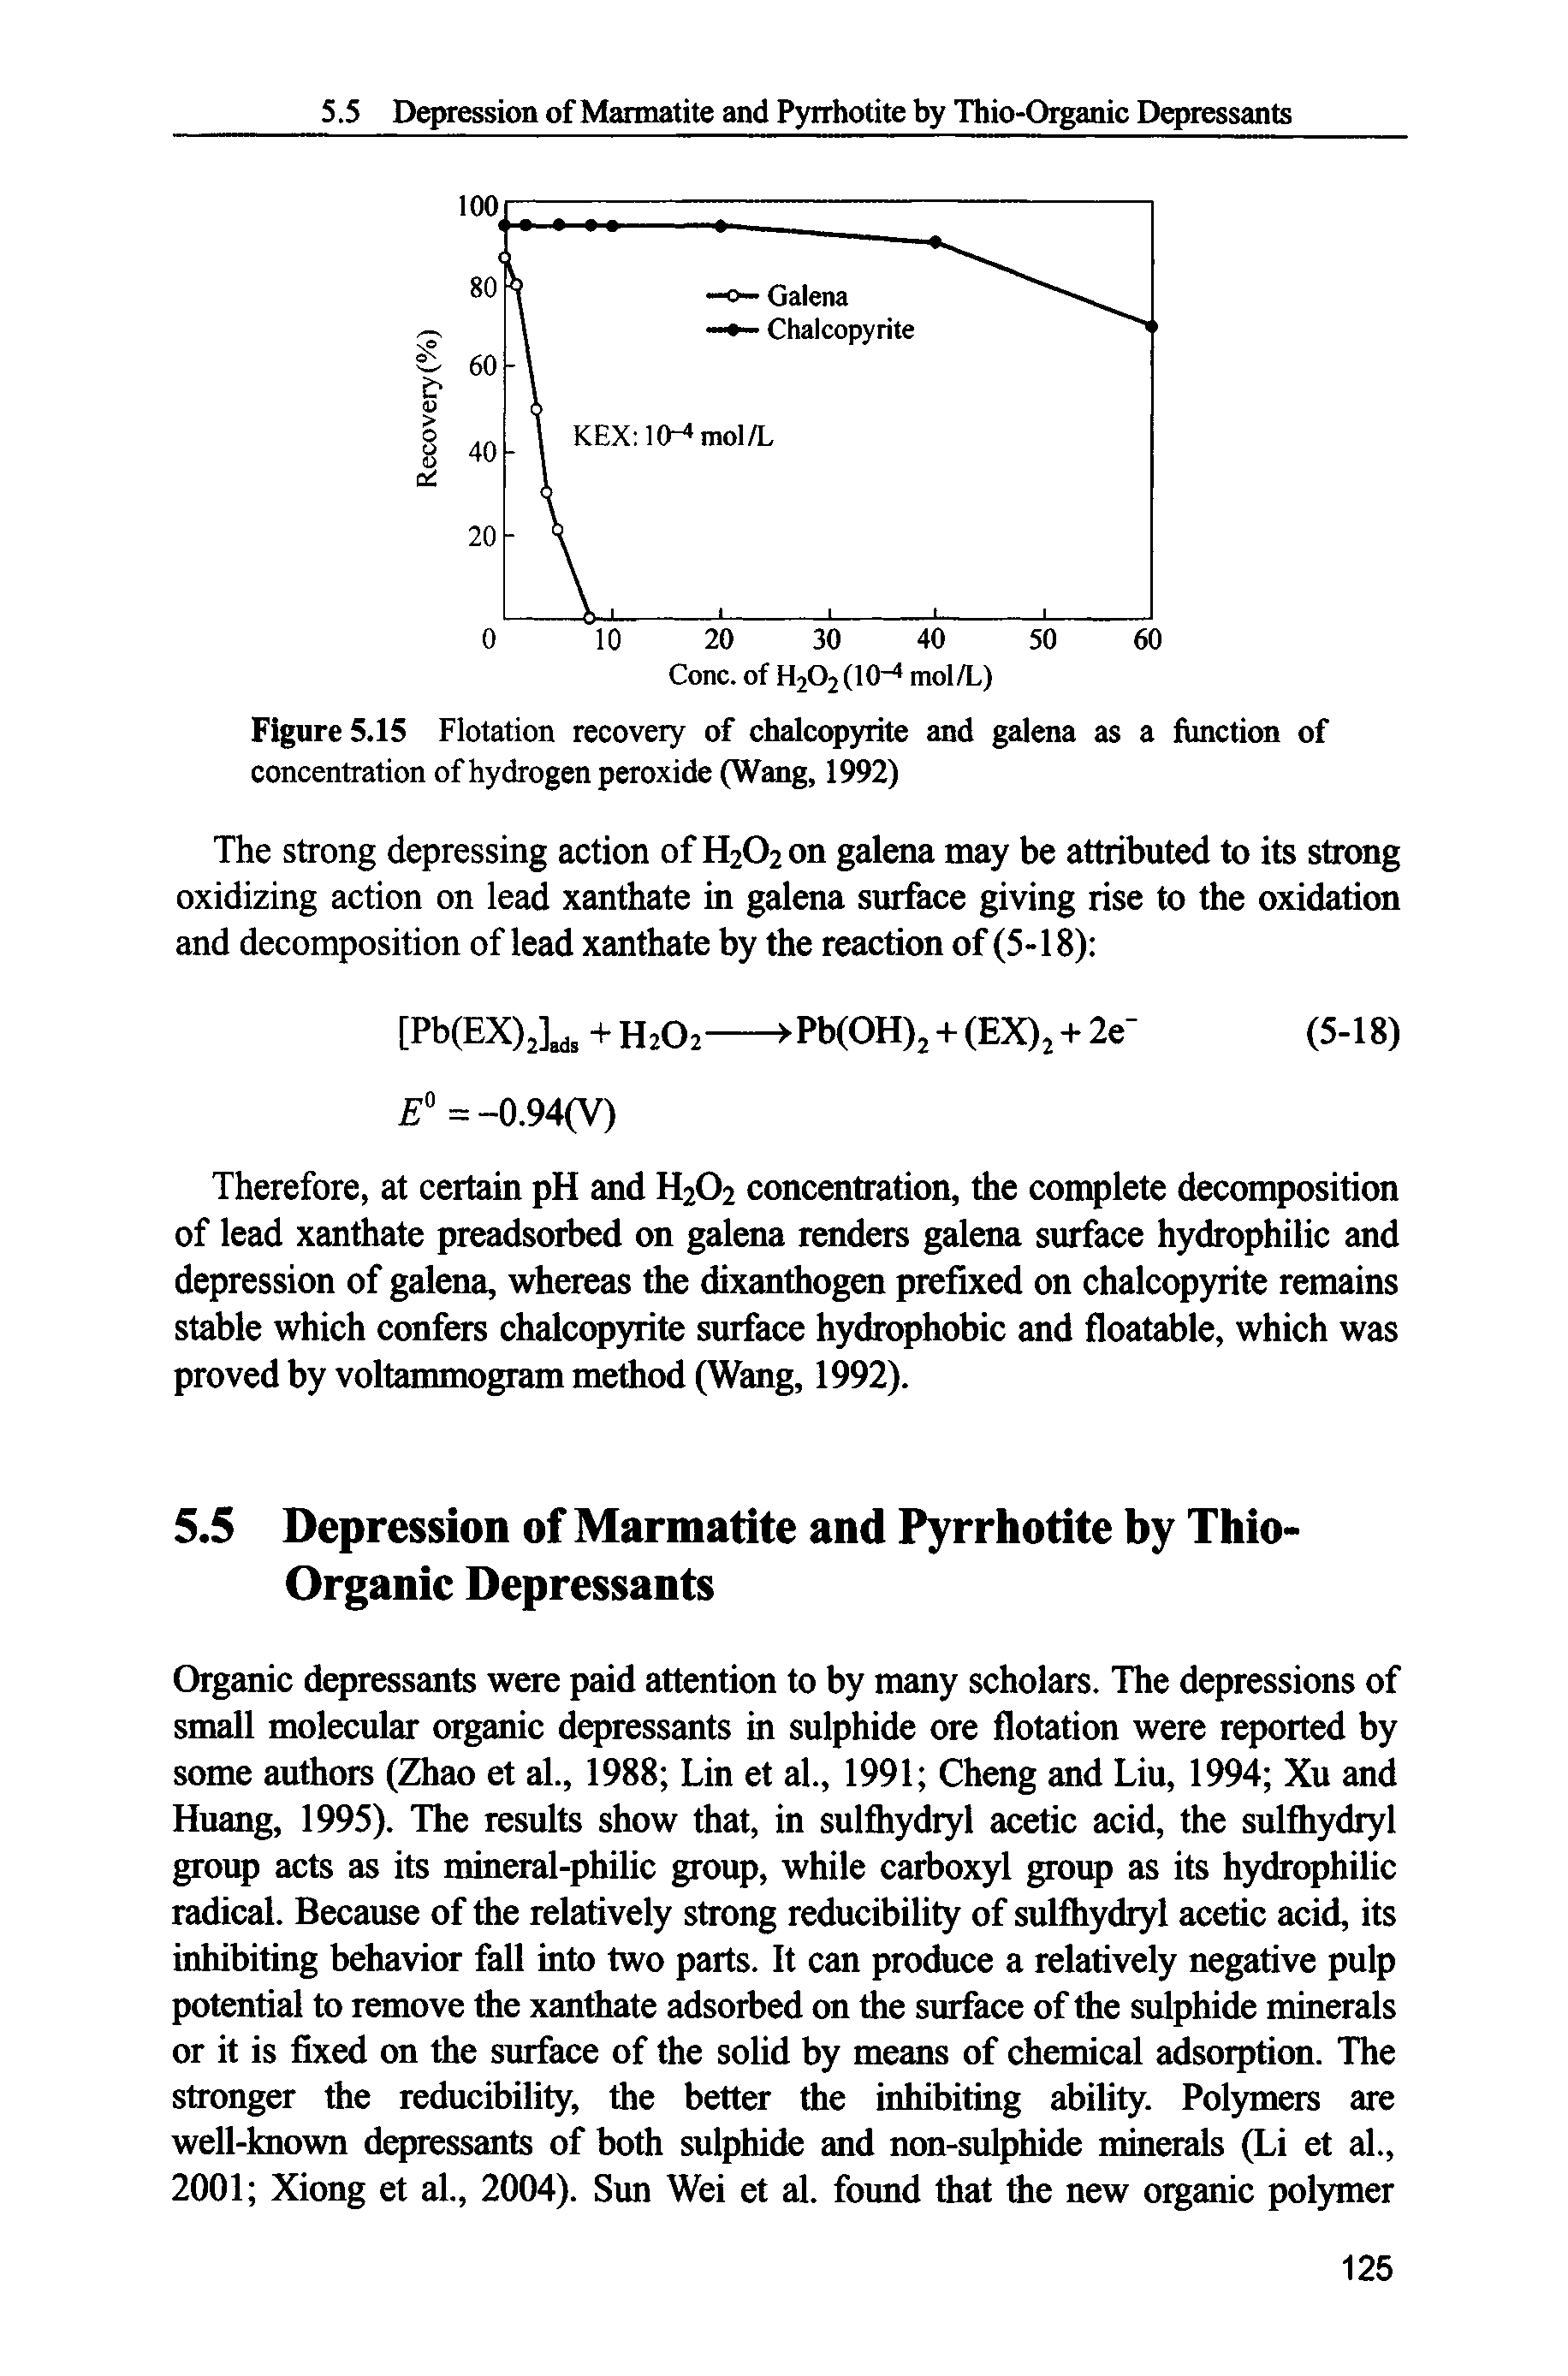 Figure 5.15 Flotation recovery of chalcopyrite and galena as a function of concentration of hydrogen peroxide (Wang, 1992)...